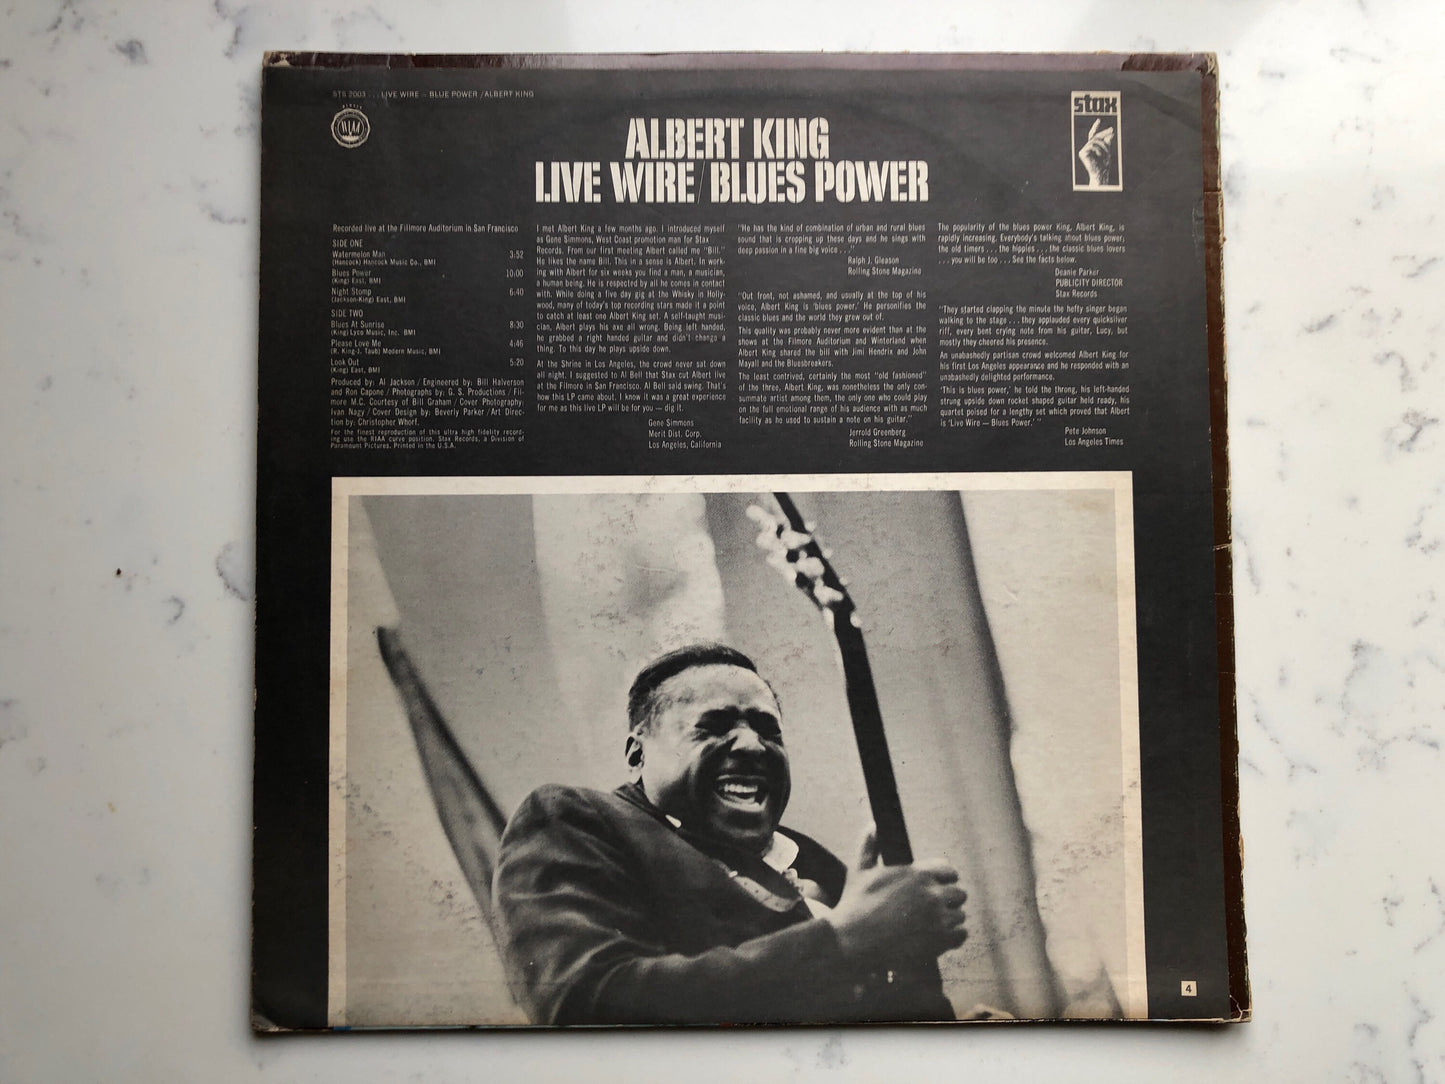 Albert King Live Wire Blues Power Vintage Vinyl Stax records STS 2003 Electric Blues 1960's R & B Records 1960's Blues Records